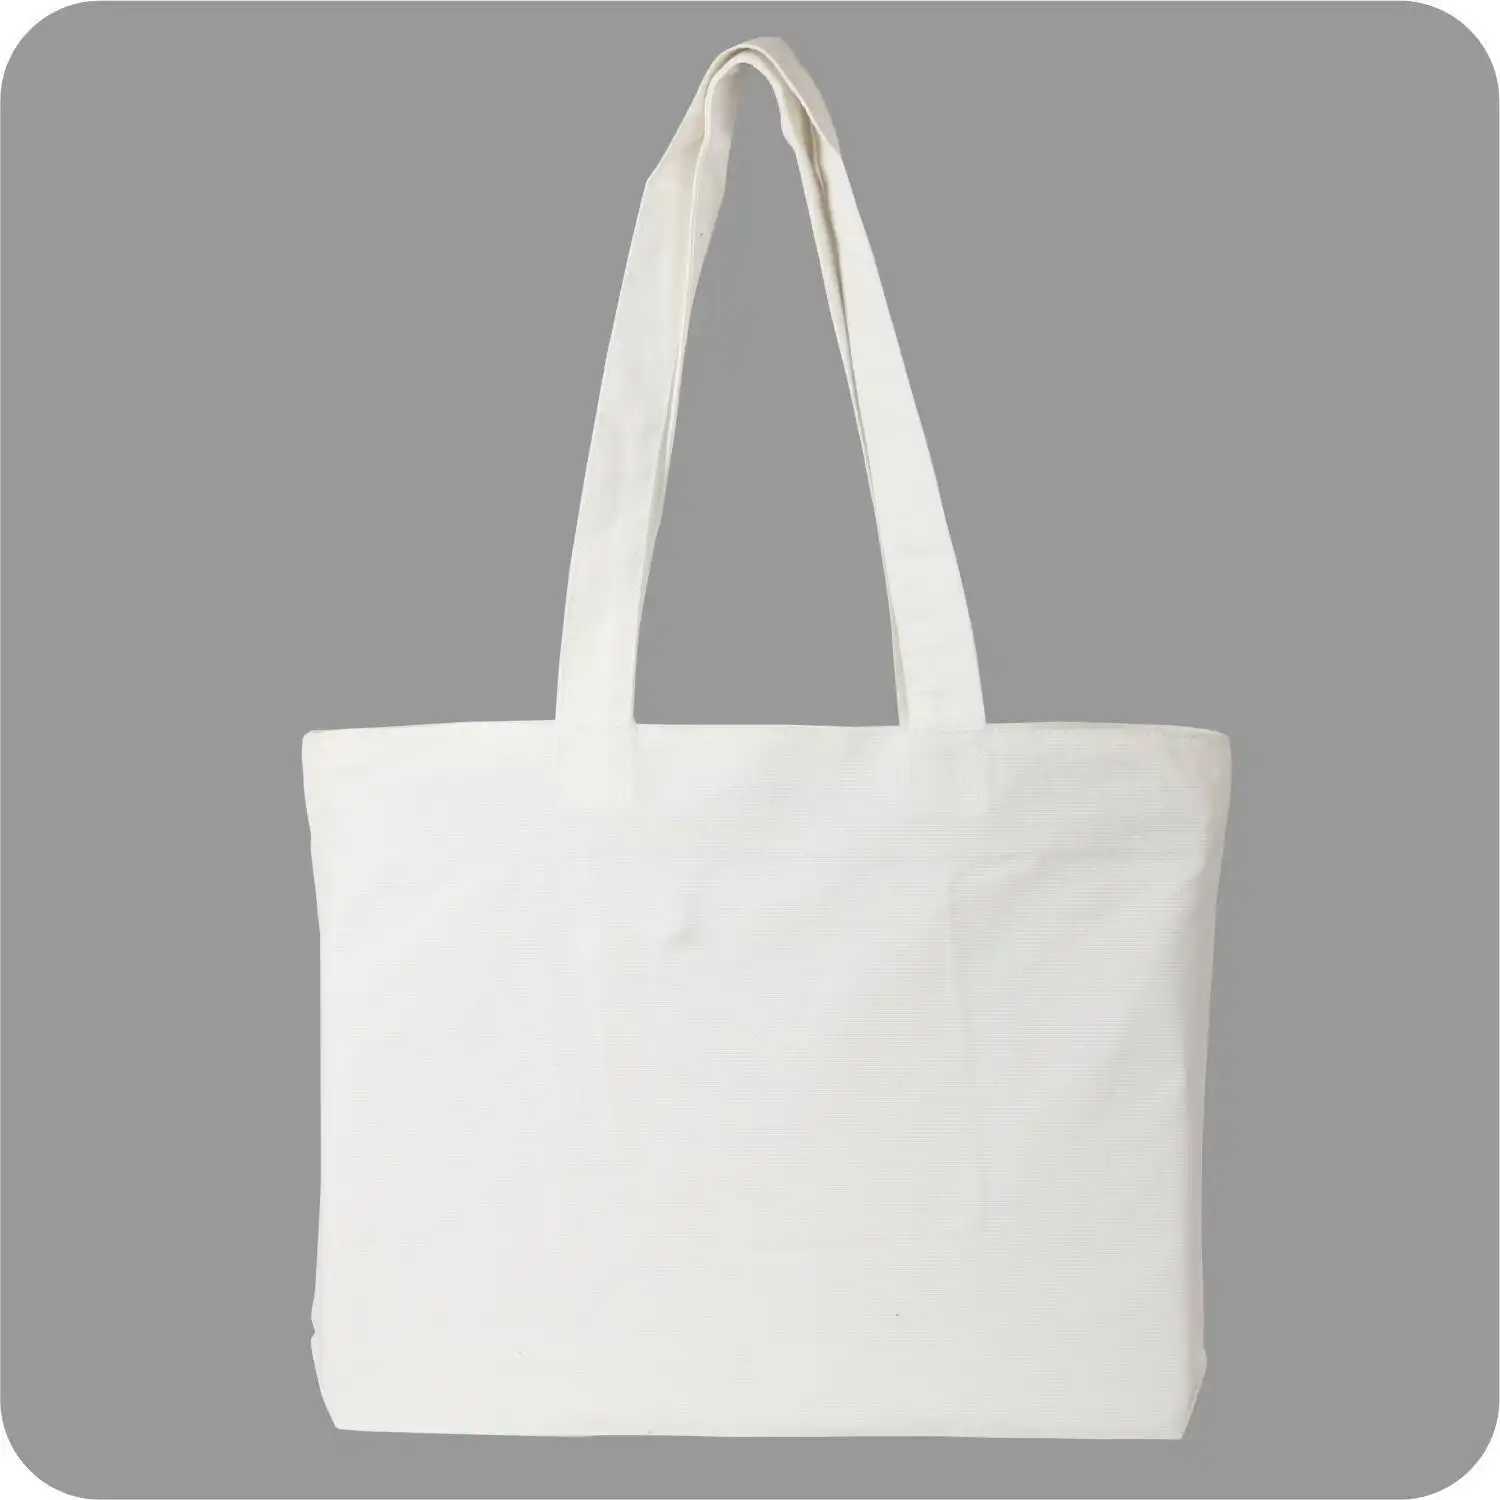 Lightweight Environmental Friendly, Heavily Loaded Canvas Tote Bags